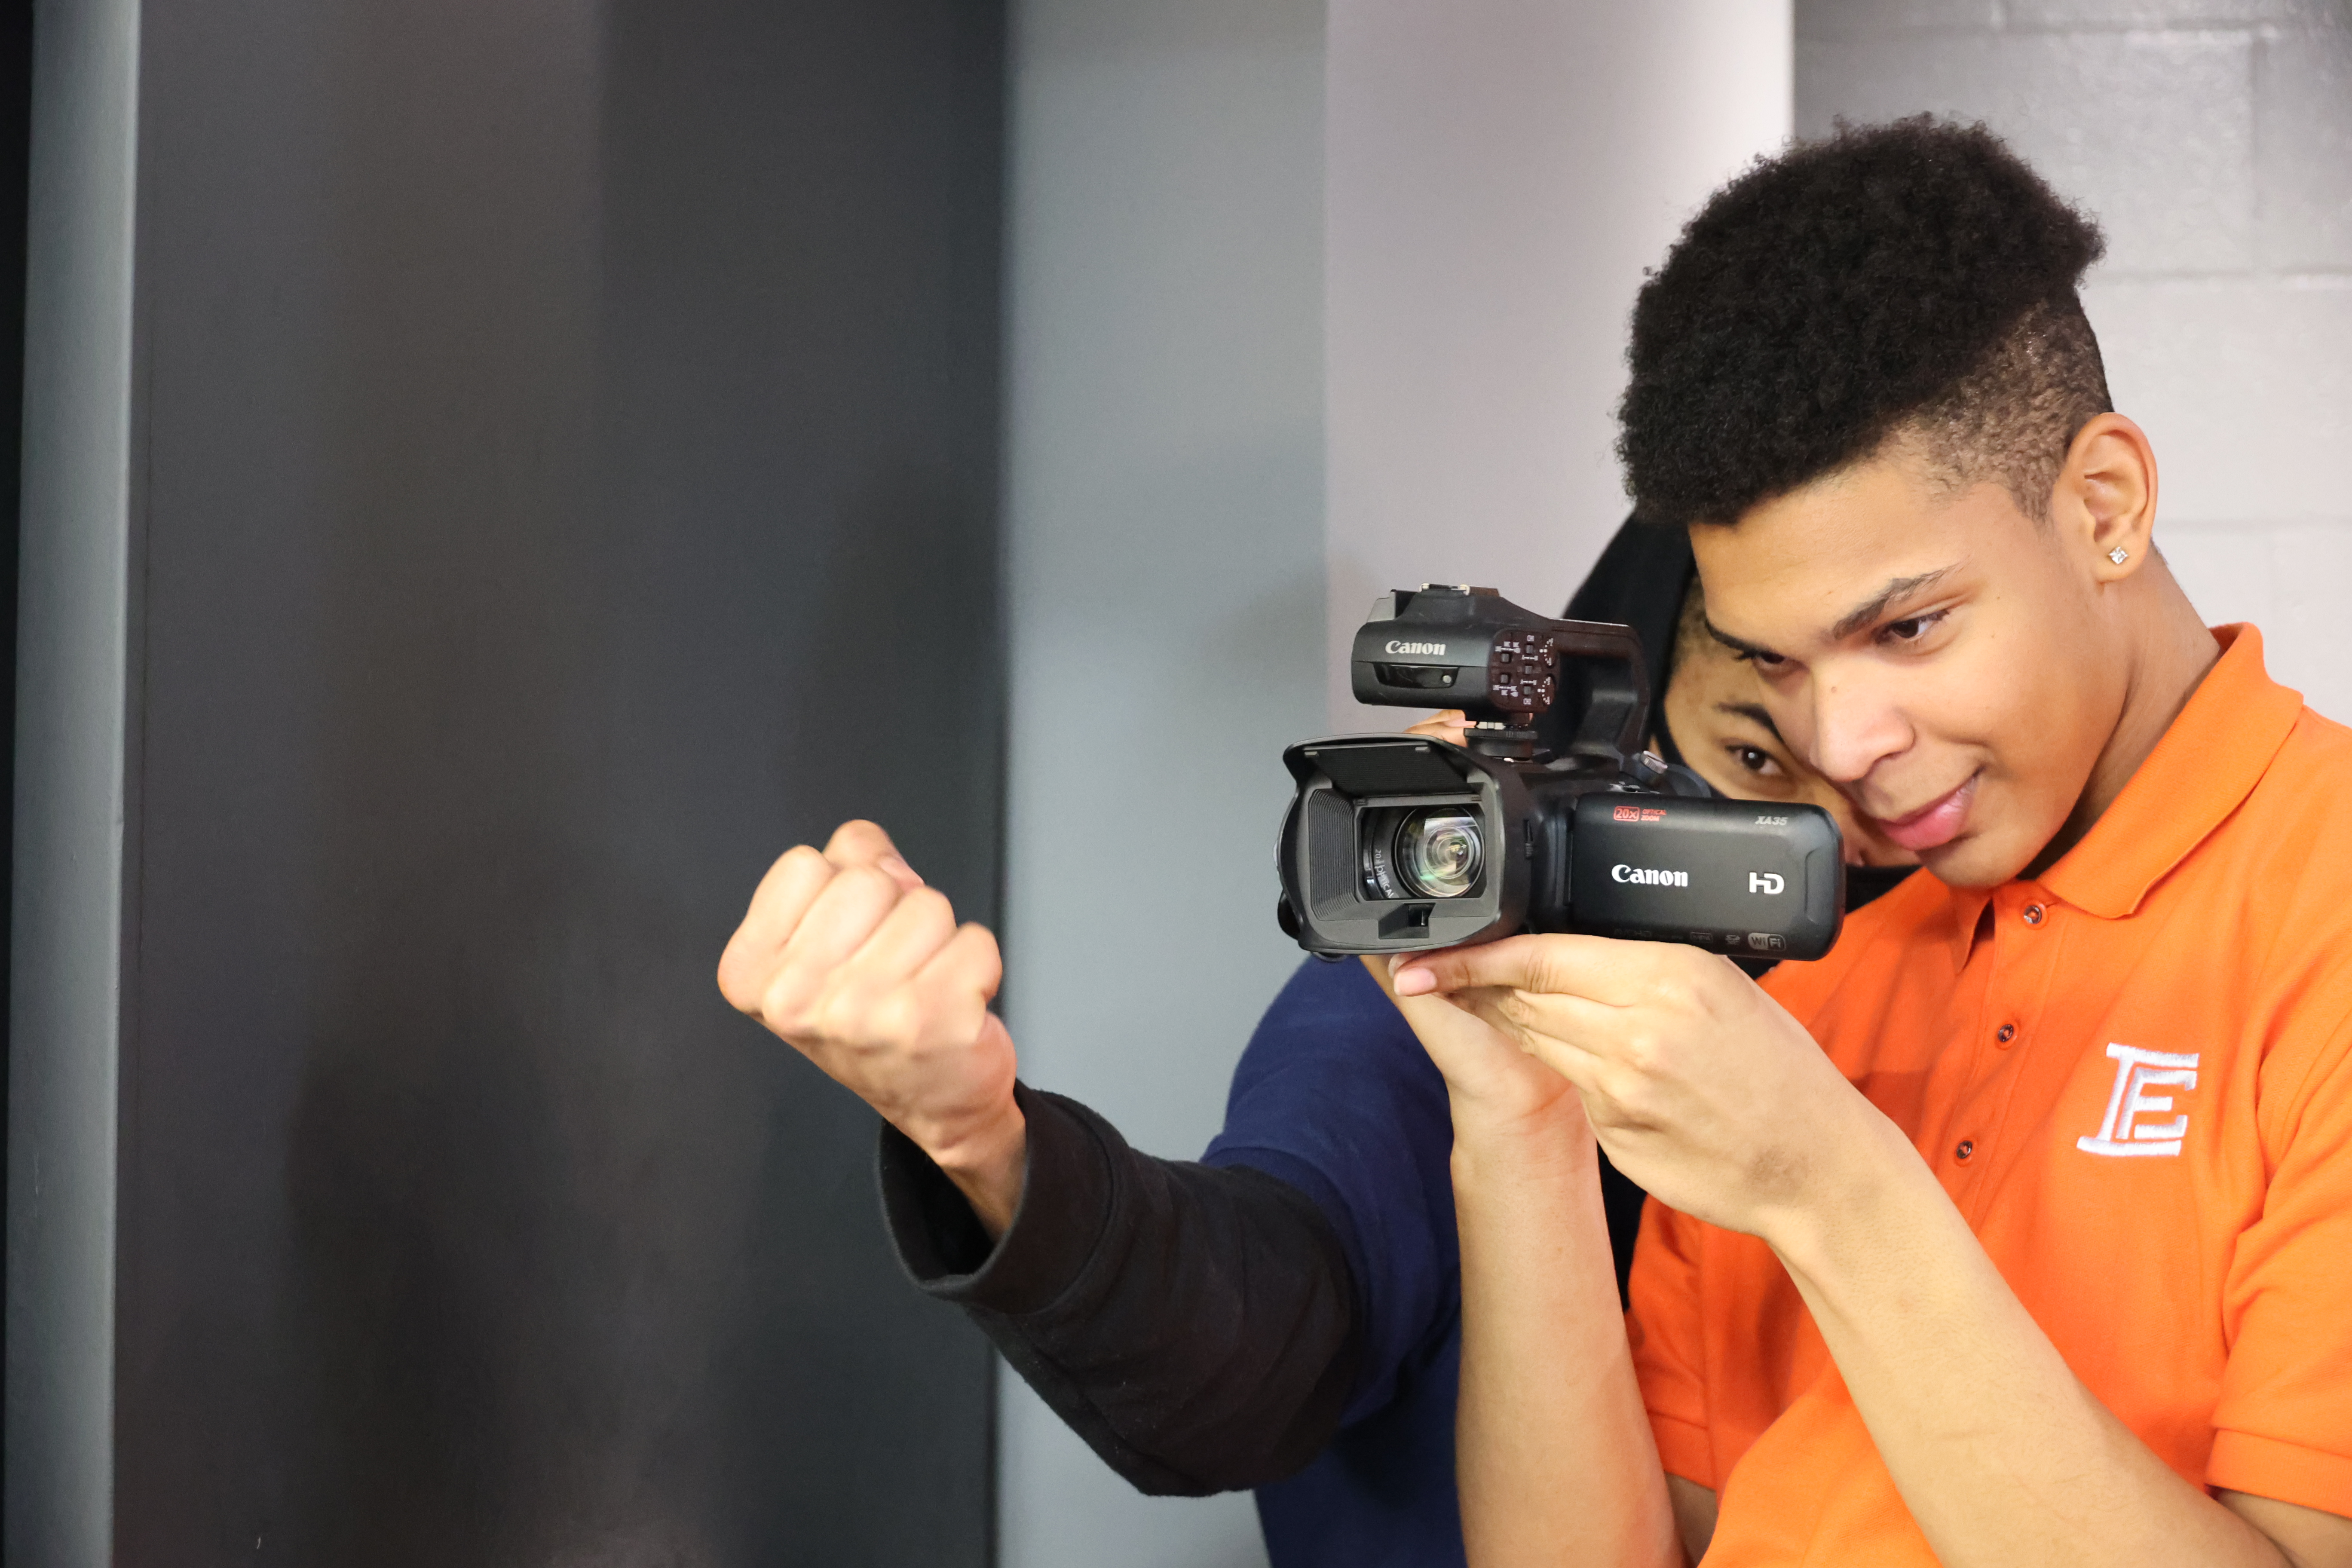 A student is holding a Canon camera to film another student raising a fist in front of the lens to capture the shot.